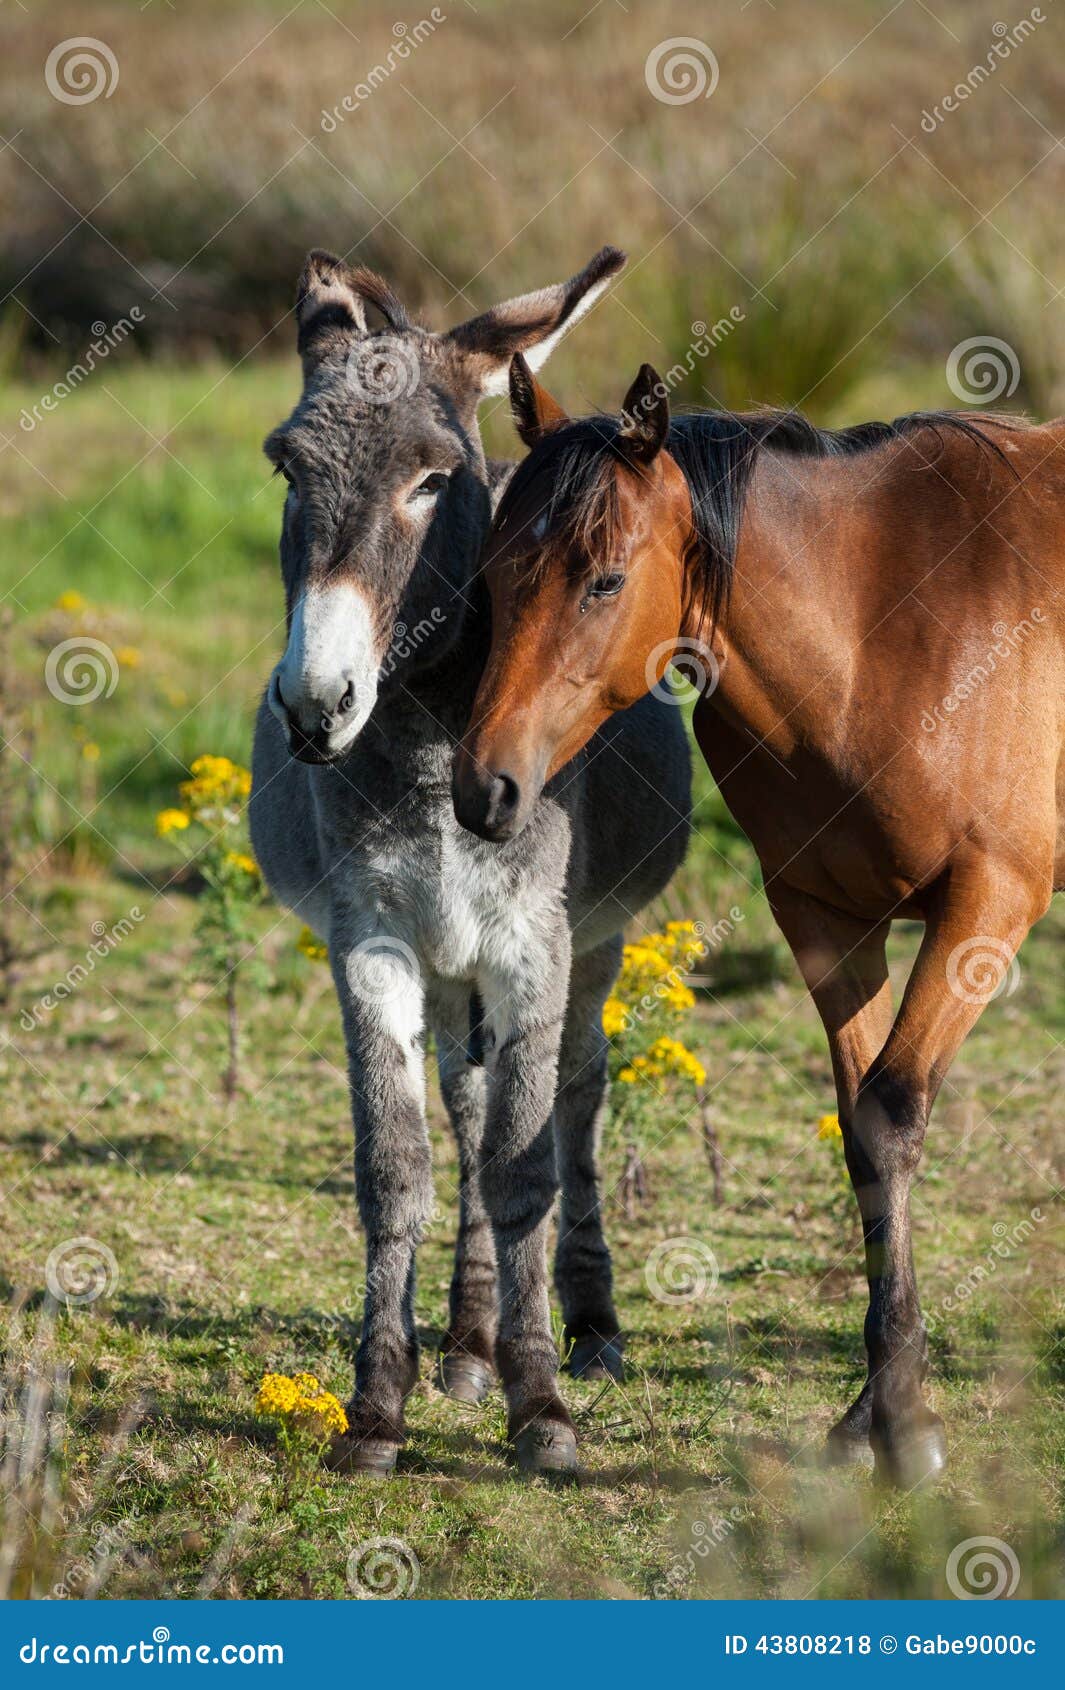 Donkey And Horse In A Field Stock Photo Image Of Friendship